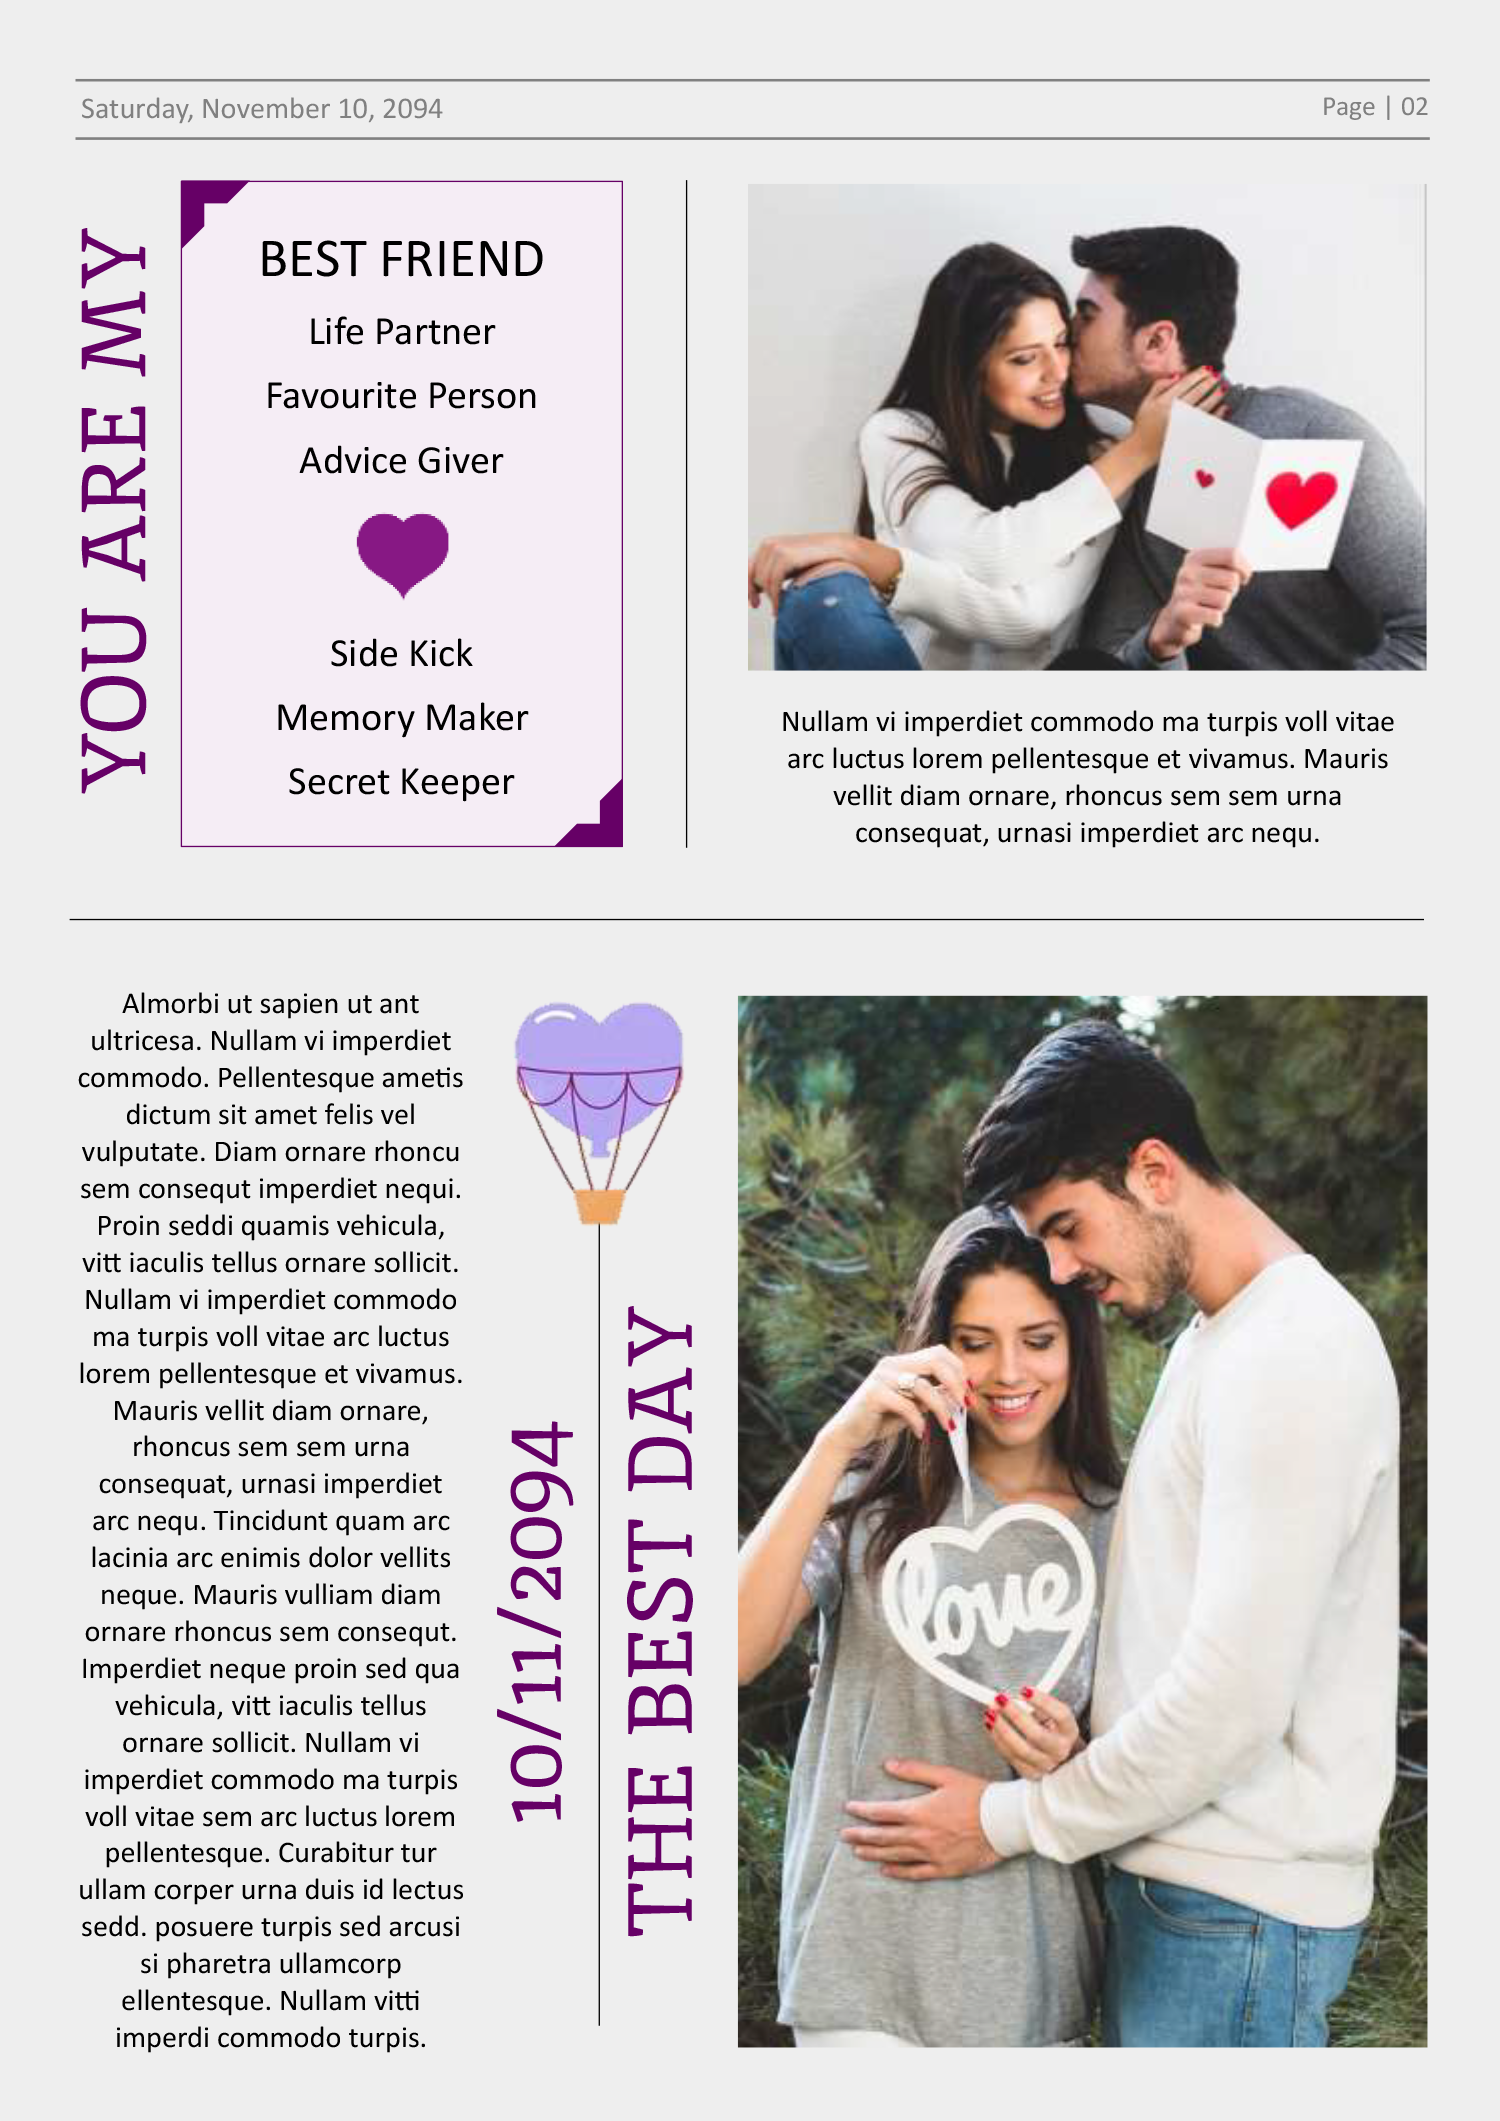 One year Wedding Anniversary Newspaper Template - Page 02